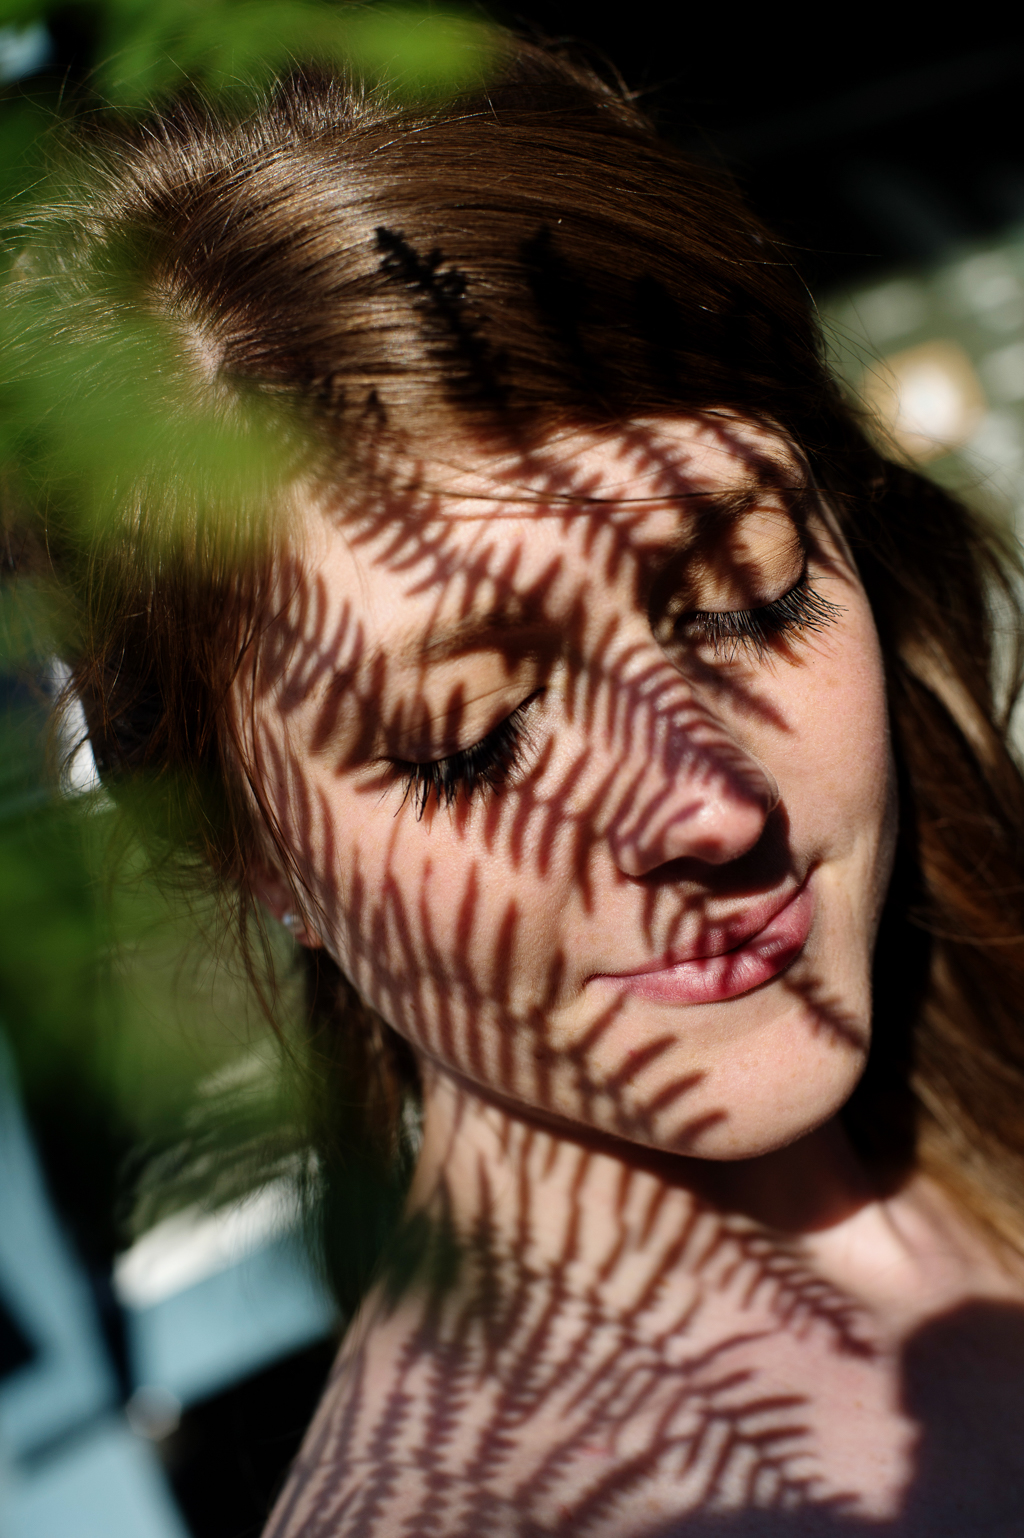 shadows from a fern leaf fall over a woman's face